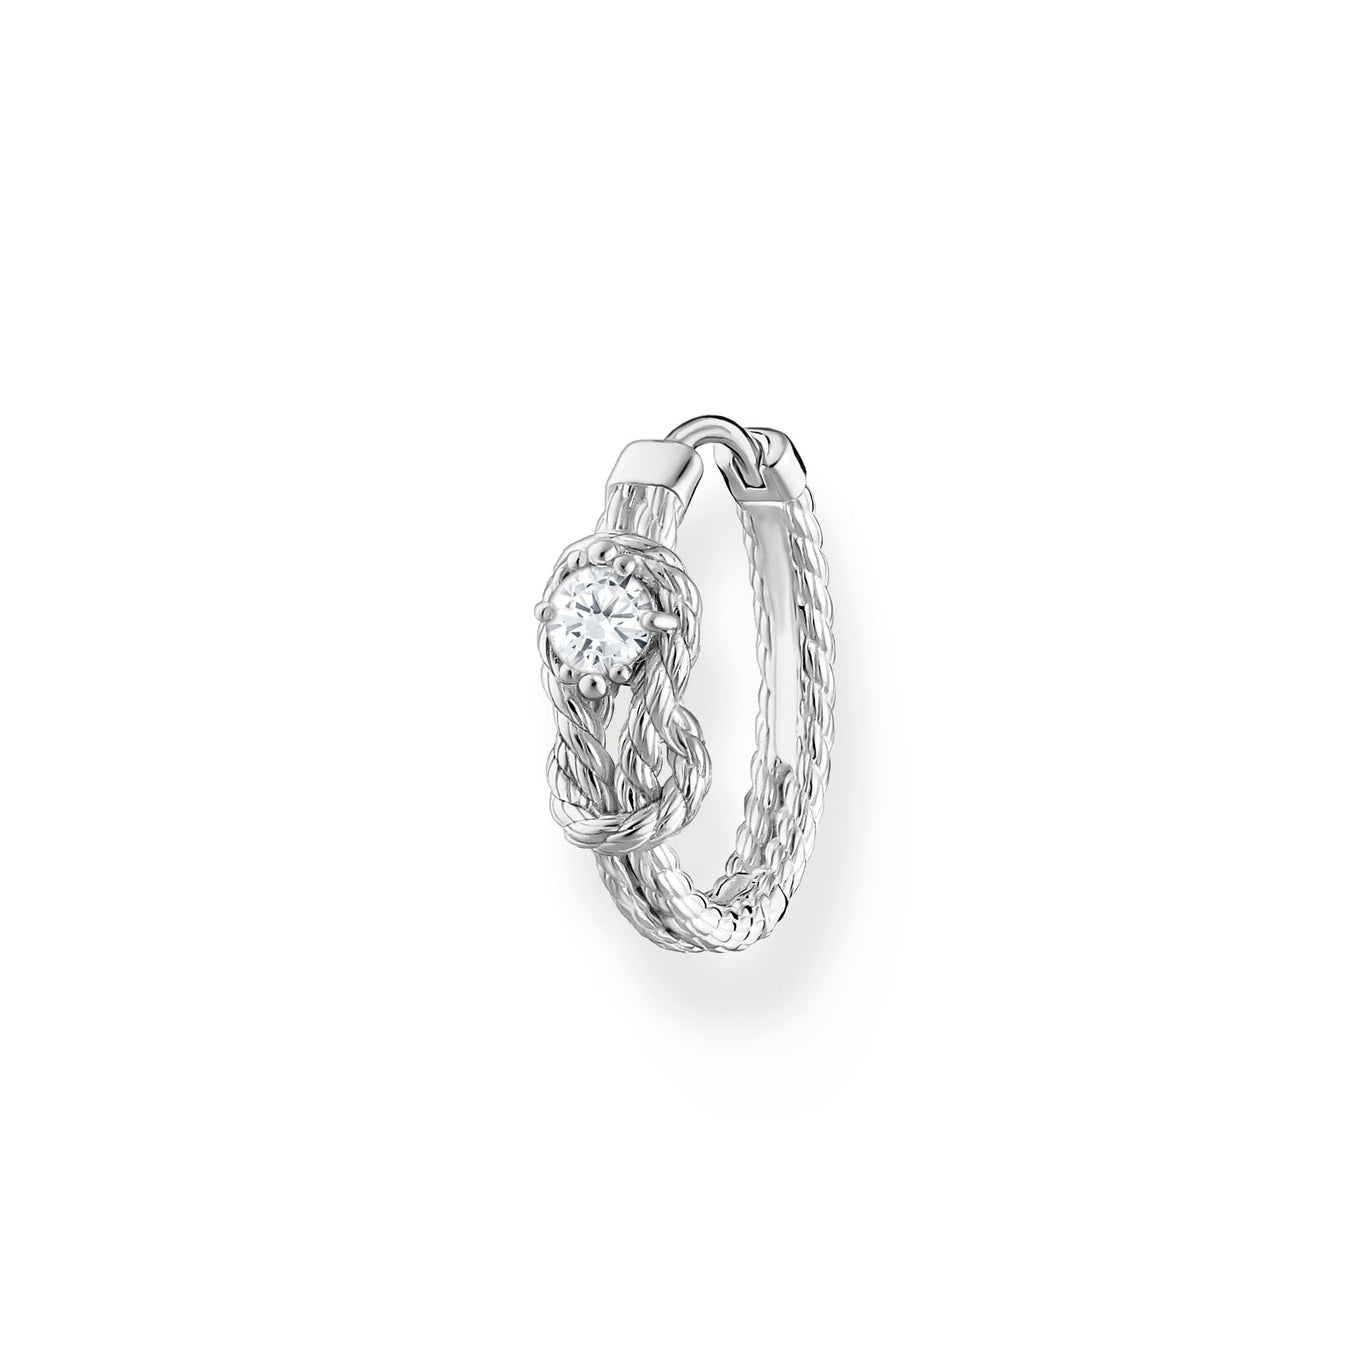 Thomas Sabo Single Hoop Rope with Knot Earring Silver 18MM